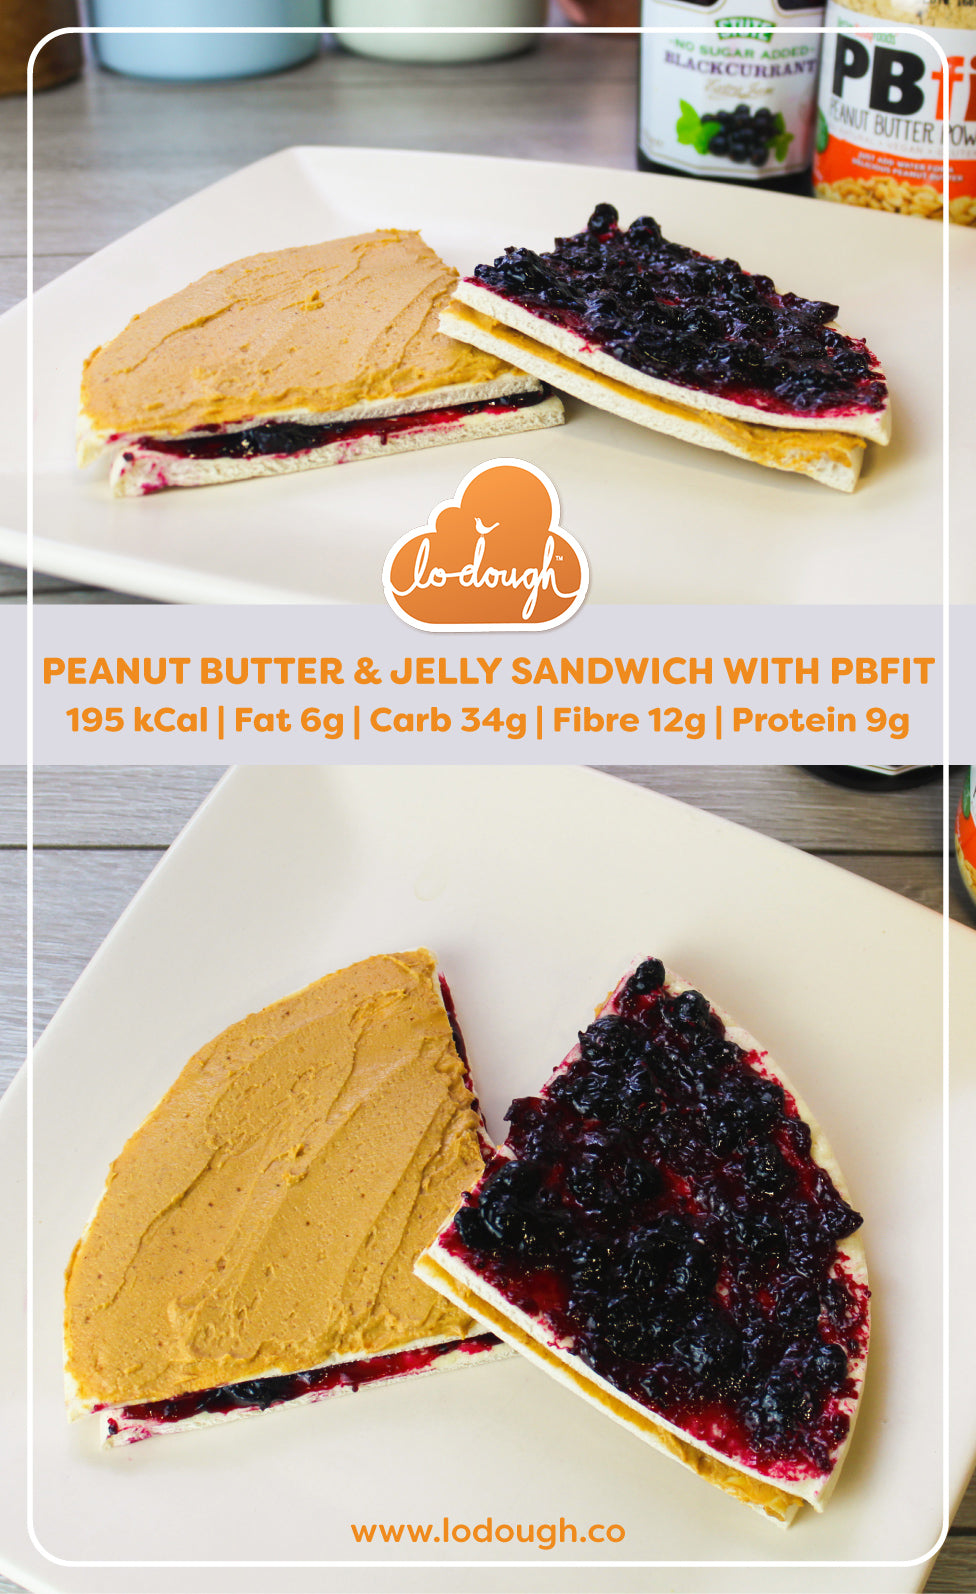 Peanut Butter & Jelly Sandwich with PBfit